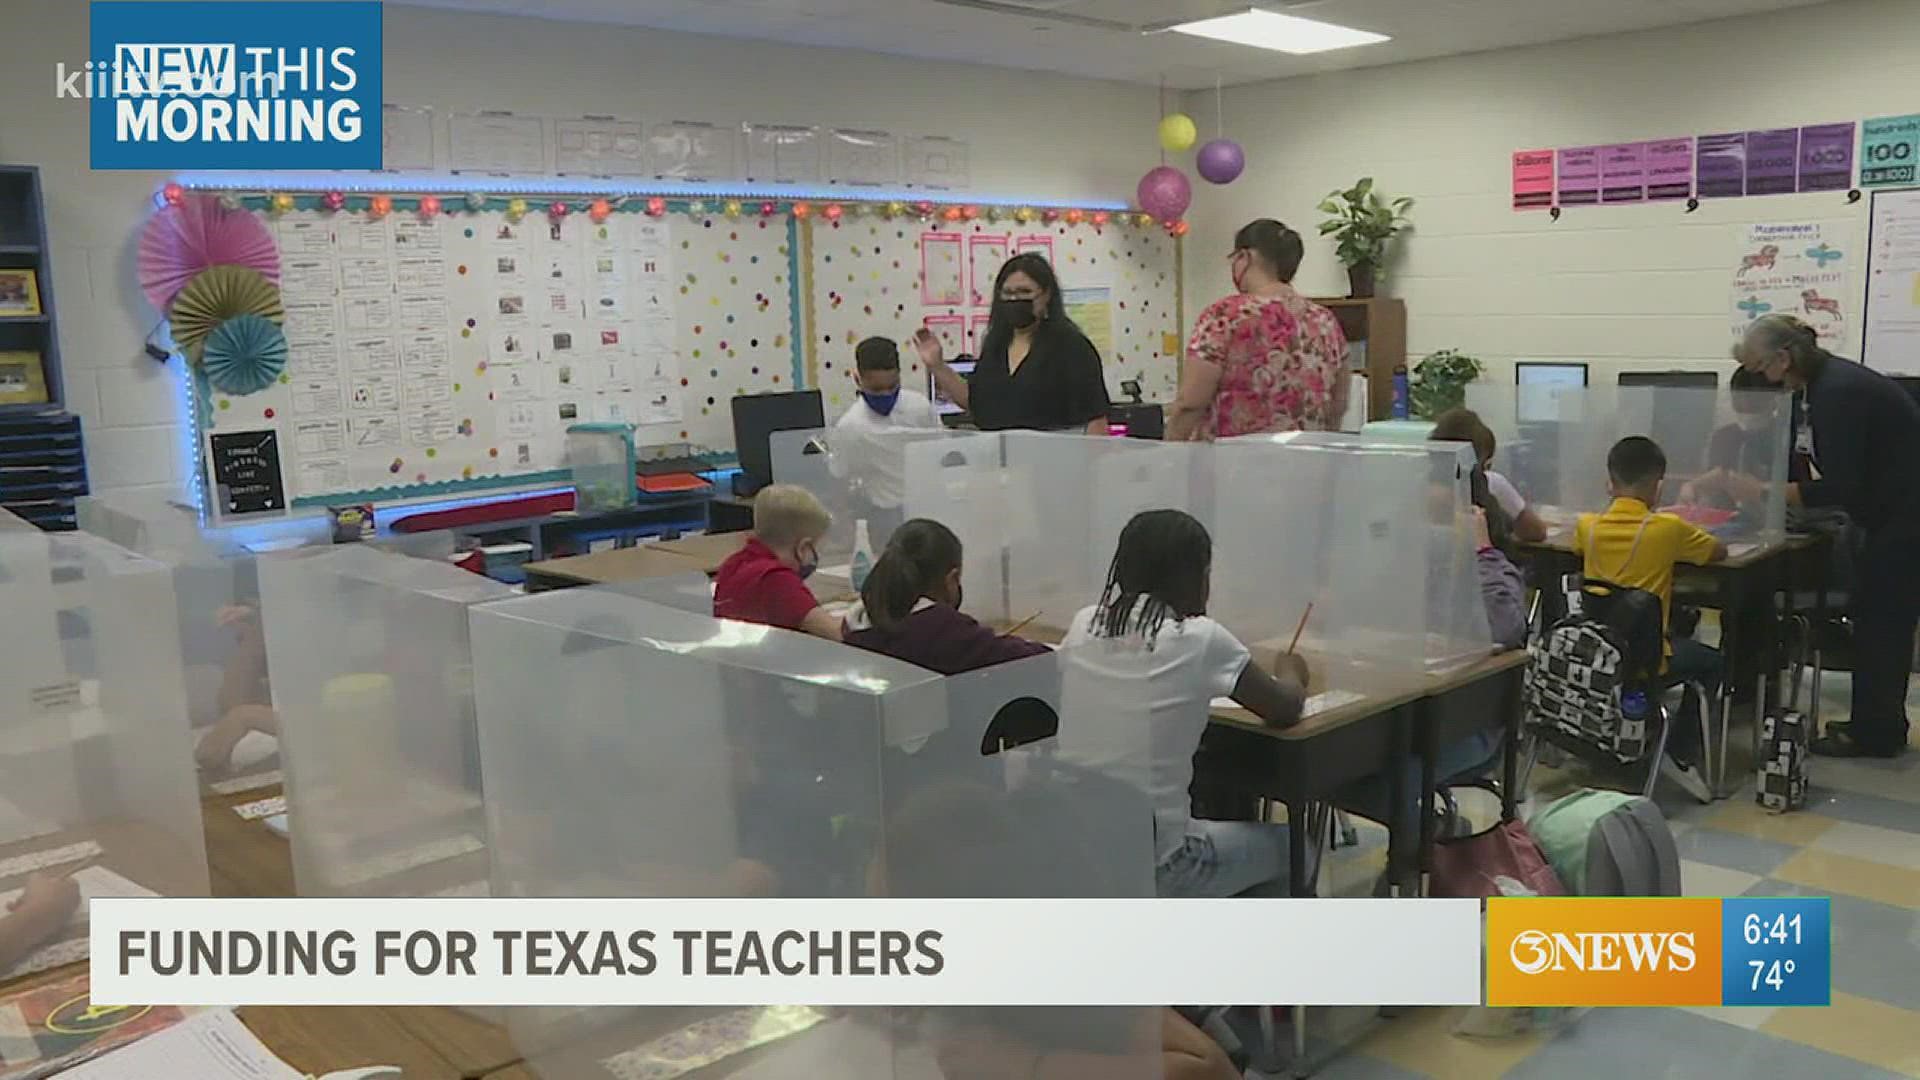 Texas teachers have a chance to win up to $7,500 for their district.